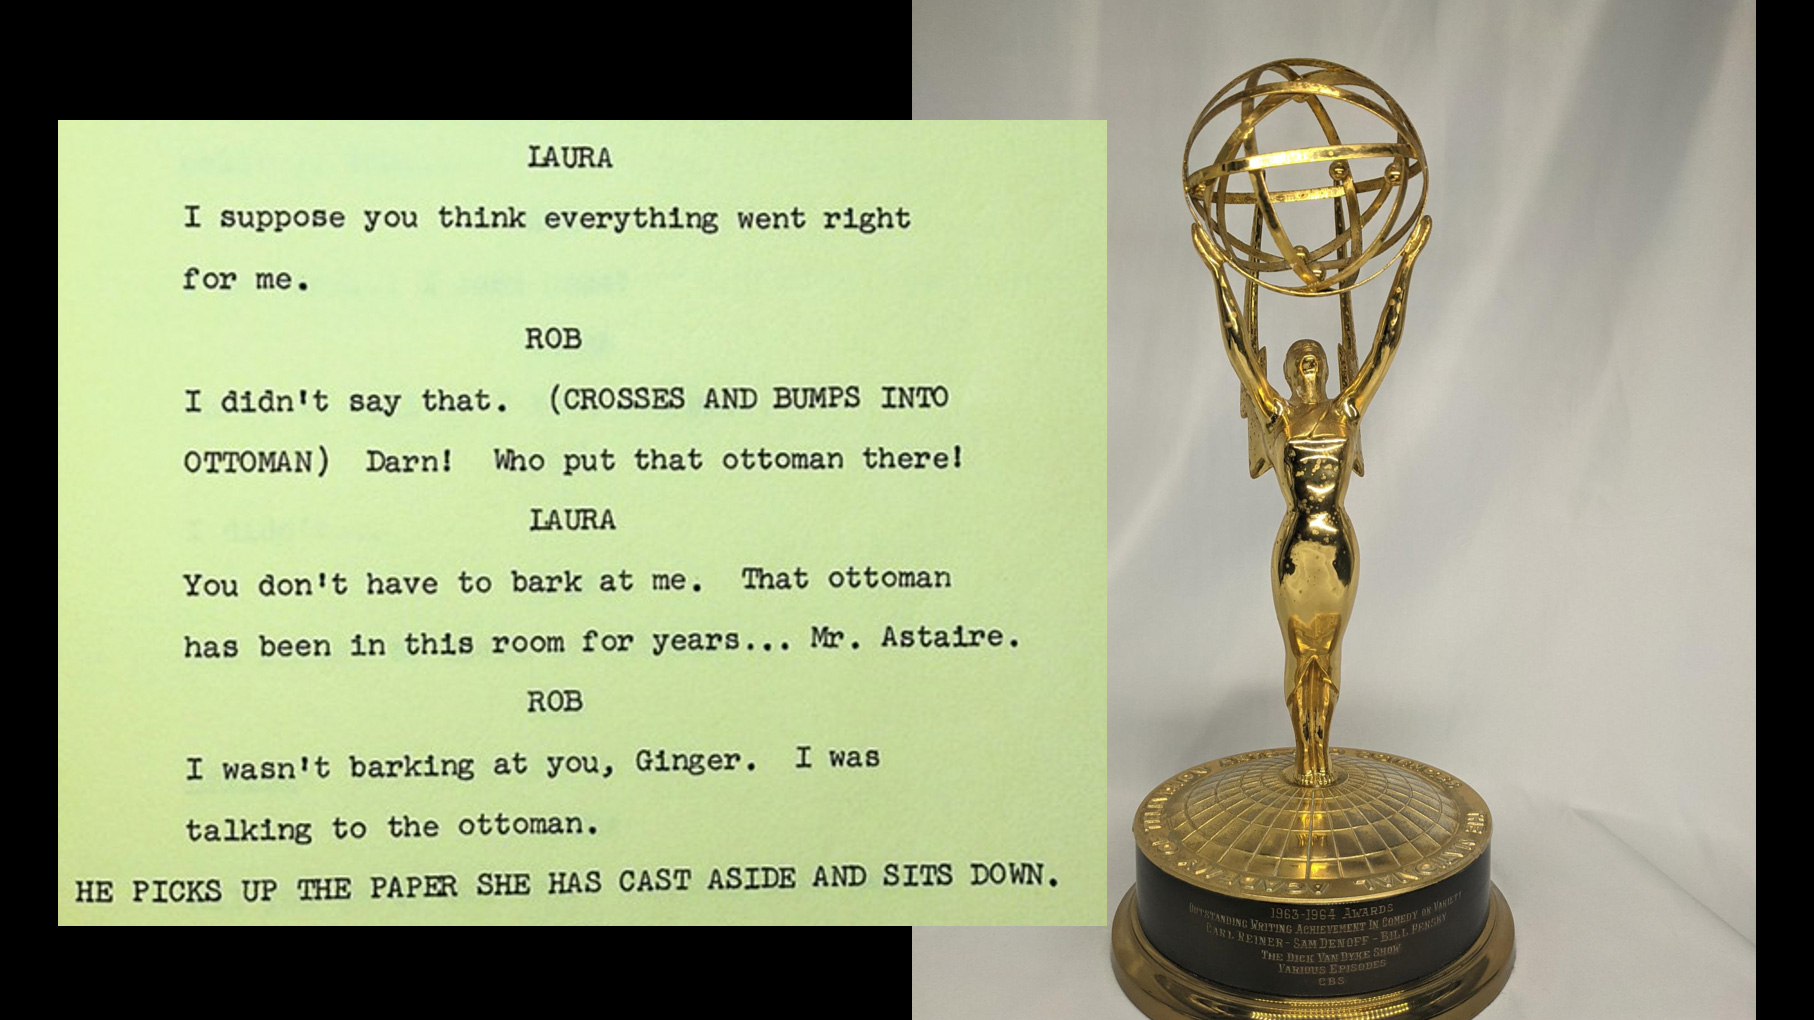 Carl Reiner’s Emmy Award and Script from The Dick Van Dyke Show